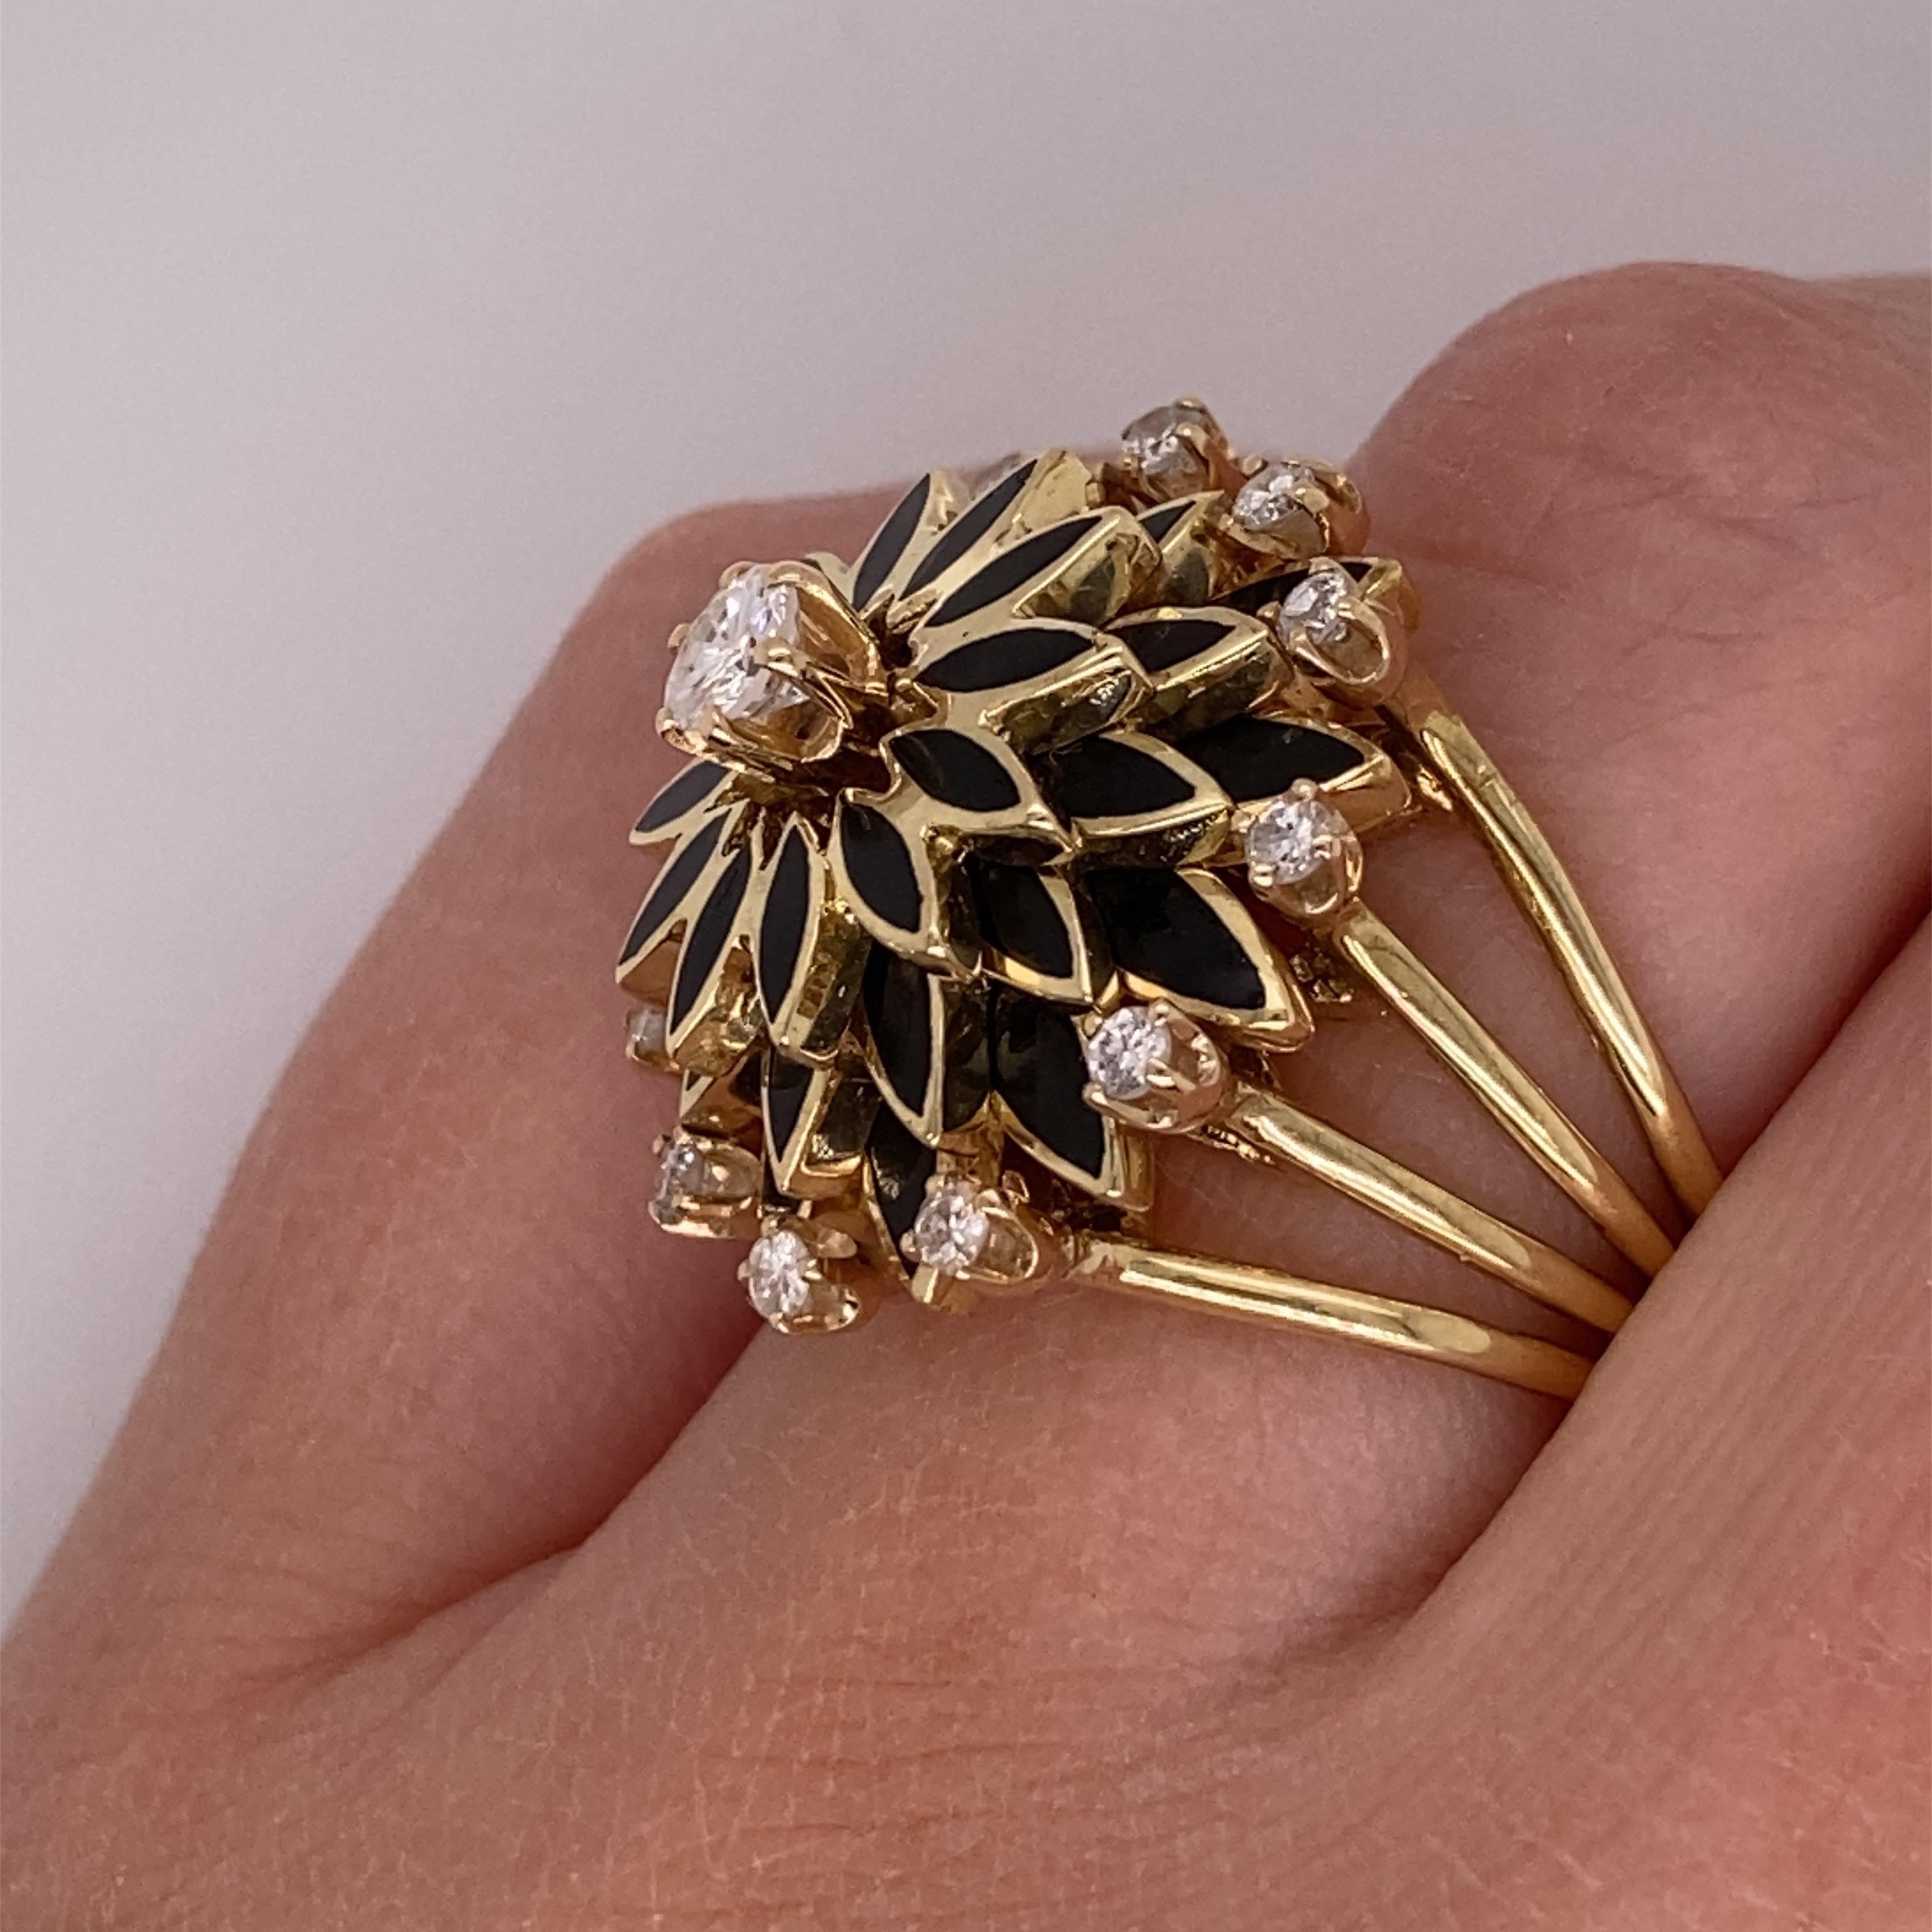 Vintage 1960s 14 Karat Yellow Gold Diamond and Black Enameled Ring For Sale 1